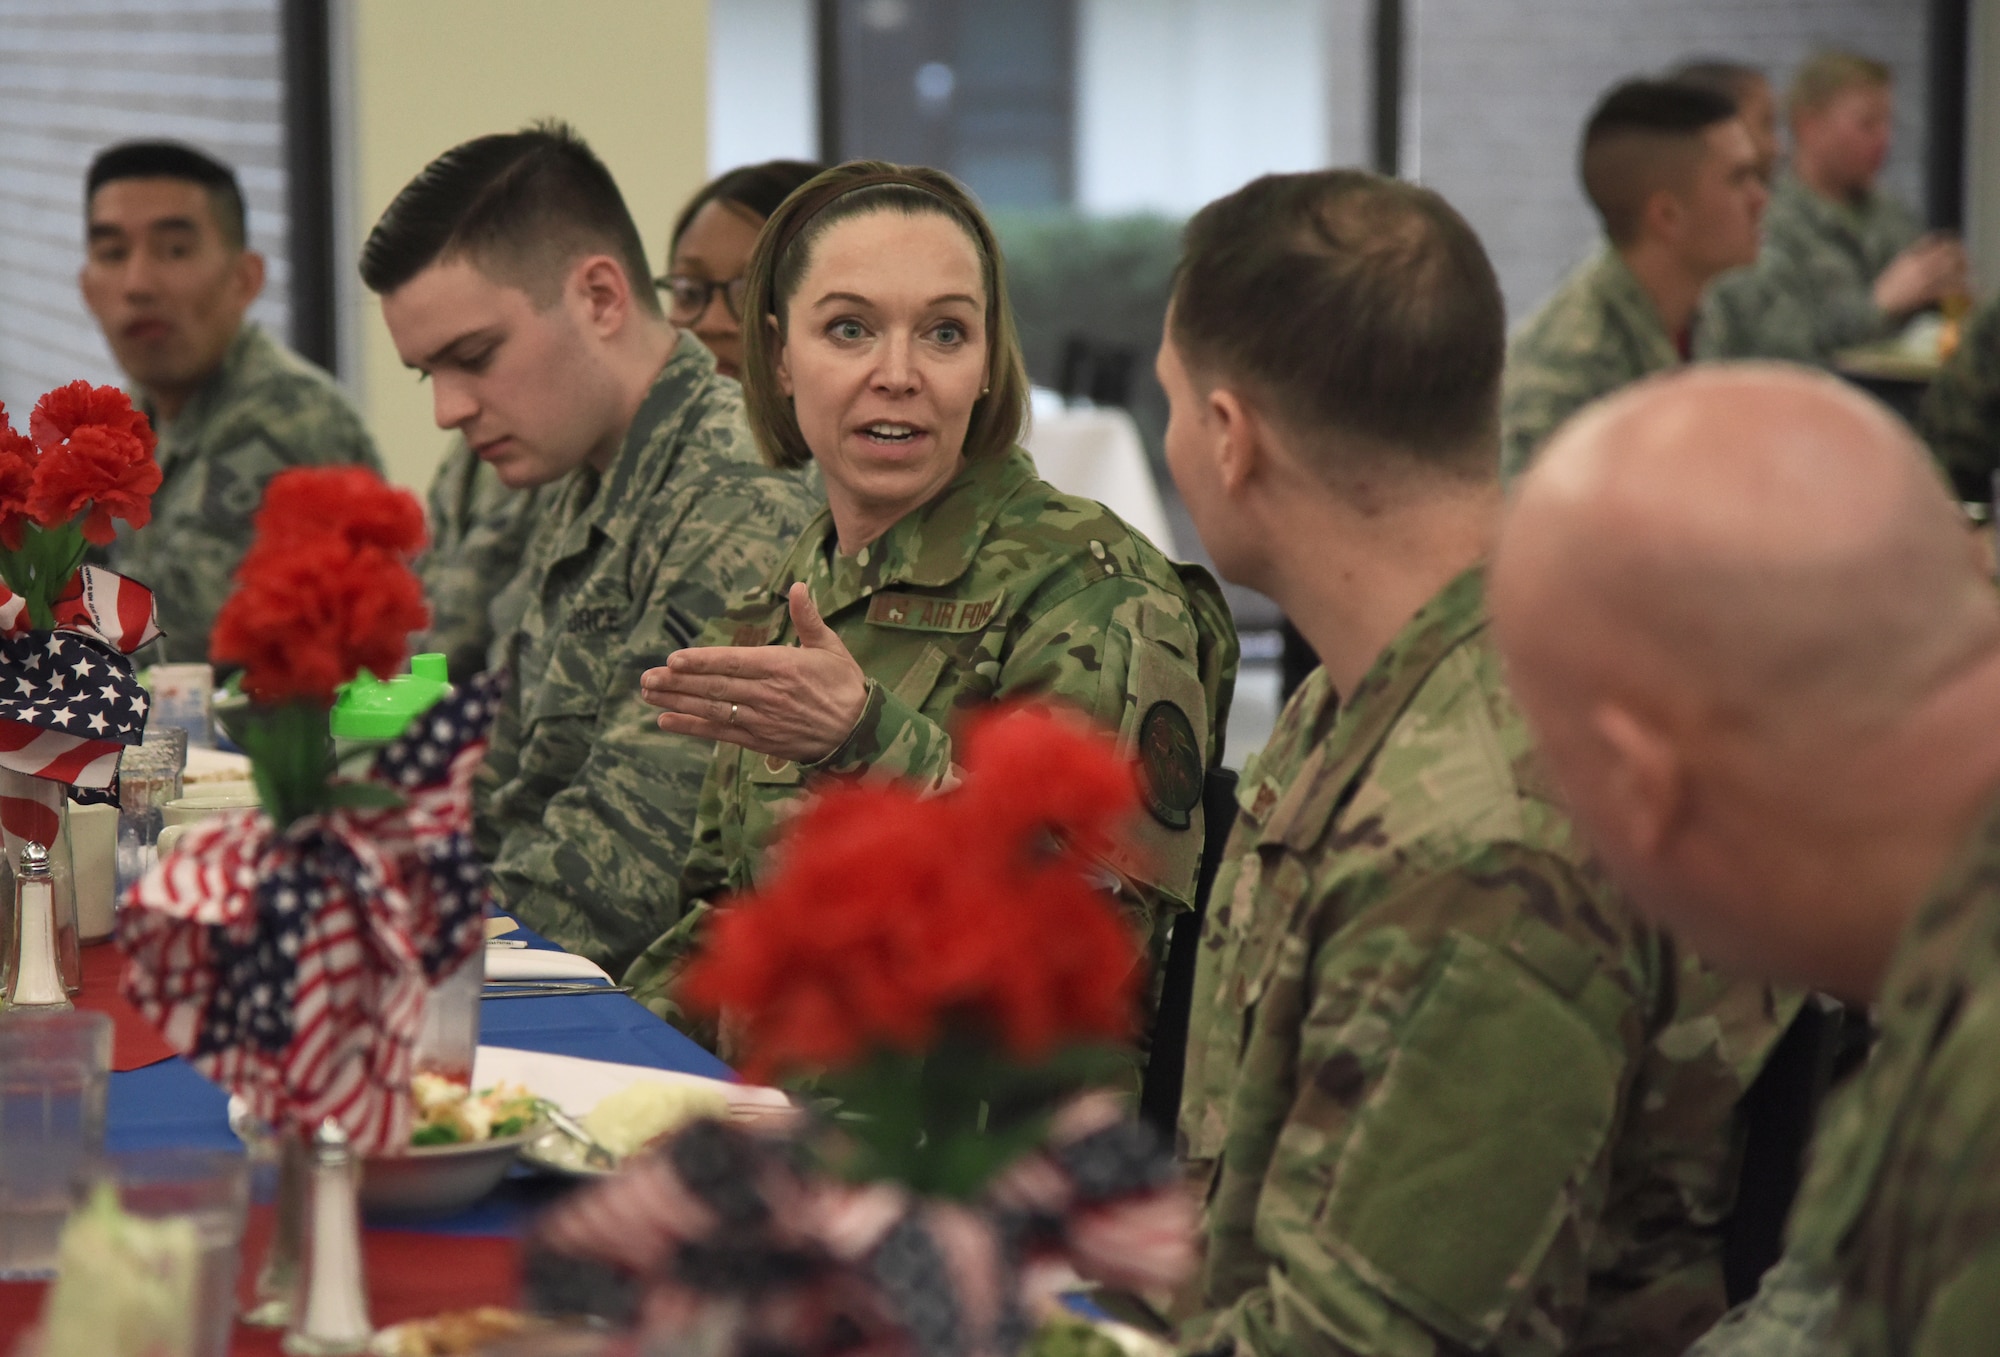 U.S. Air Force Chief Master Sgt. Juliet Gudgel, Air Education and Training Command command chief, speaks with Airmen about their Air Force experience at a lunch inside the Live Oak Dining Facility during a base immersion tour at Keesler Air Force Base, Mississippi, Feb. 15, 2019. Throughout the three-day tour Gudgel received 2nd Air Force and 81st Training Wing mission briefings, ate breakfast with Airmen in training, received an 81st Security Forces Squadron military working dog demonstration and served as the guest speaker at the Chief Master Sergeant Induction Ceremony. (U.S. Air Force photo by Kemberly Groue)